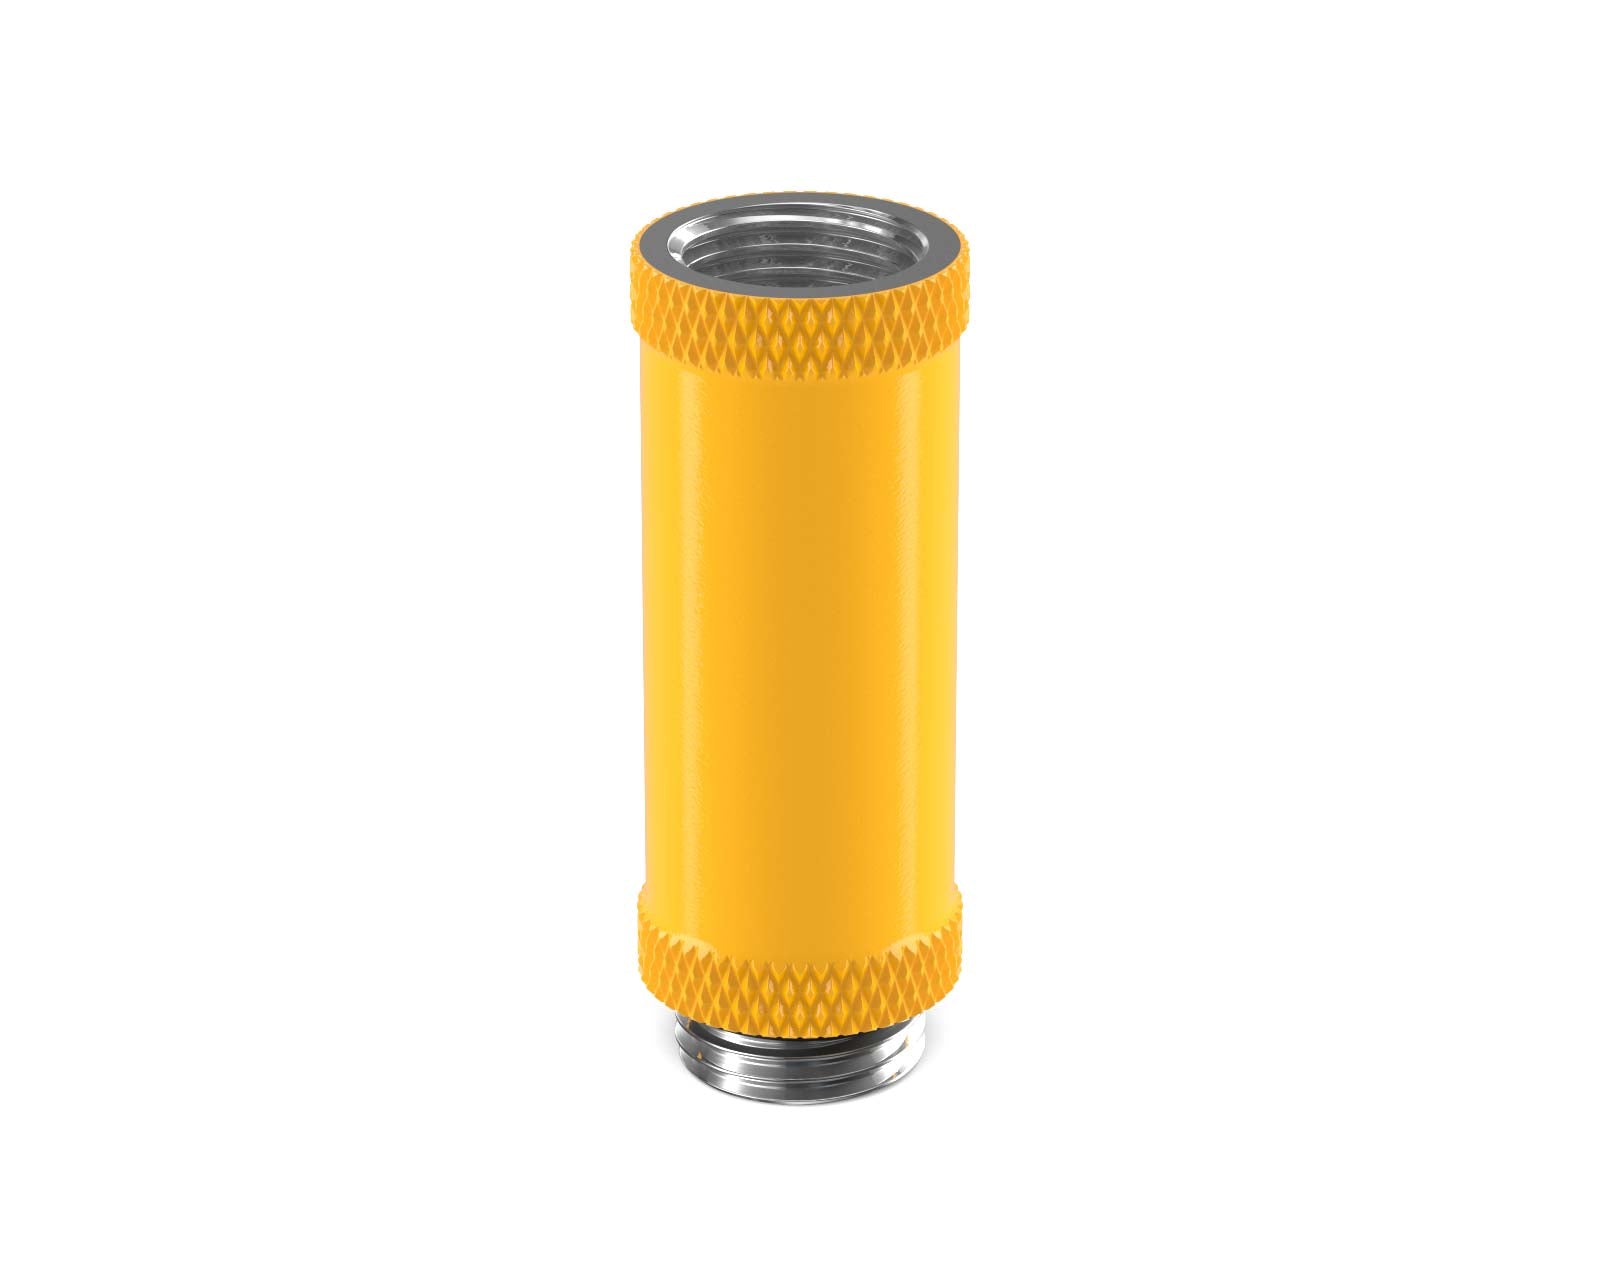 PrimoChill Male to Female G 1/4in. 40mm SX Extension Coupler - PrimoChill - KEEPING IT COOL Yellow